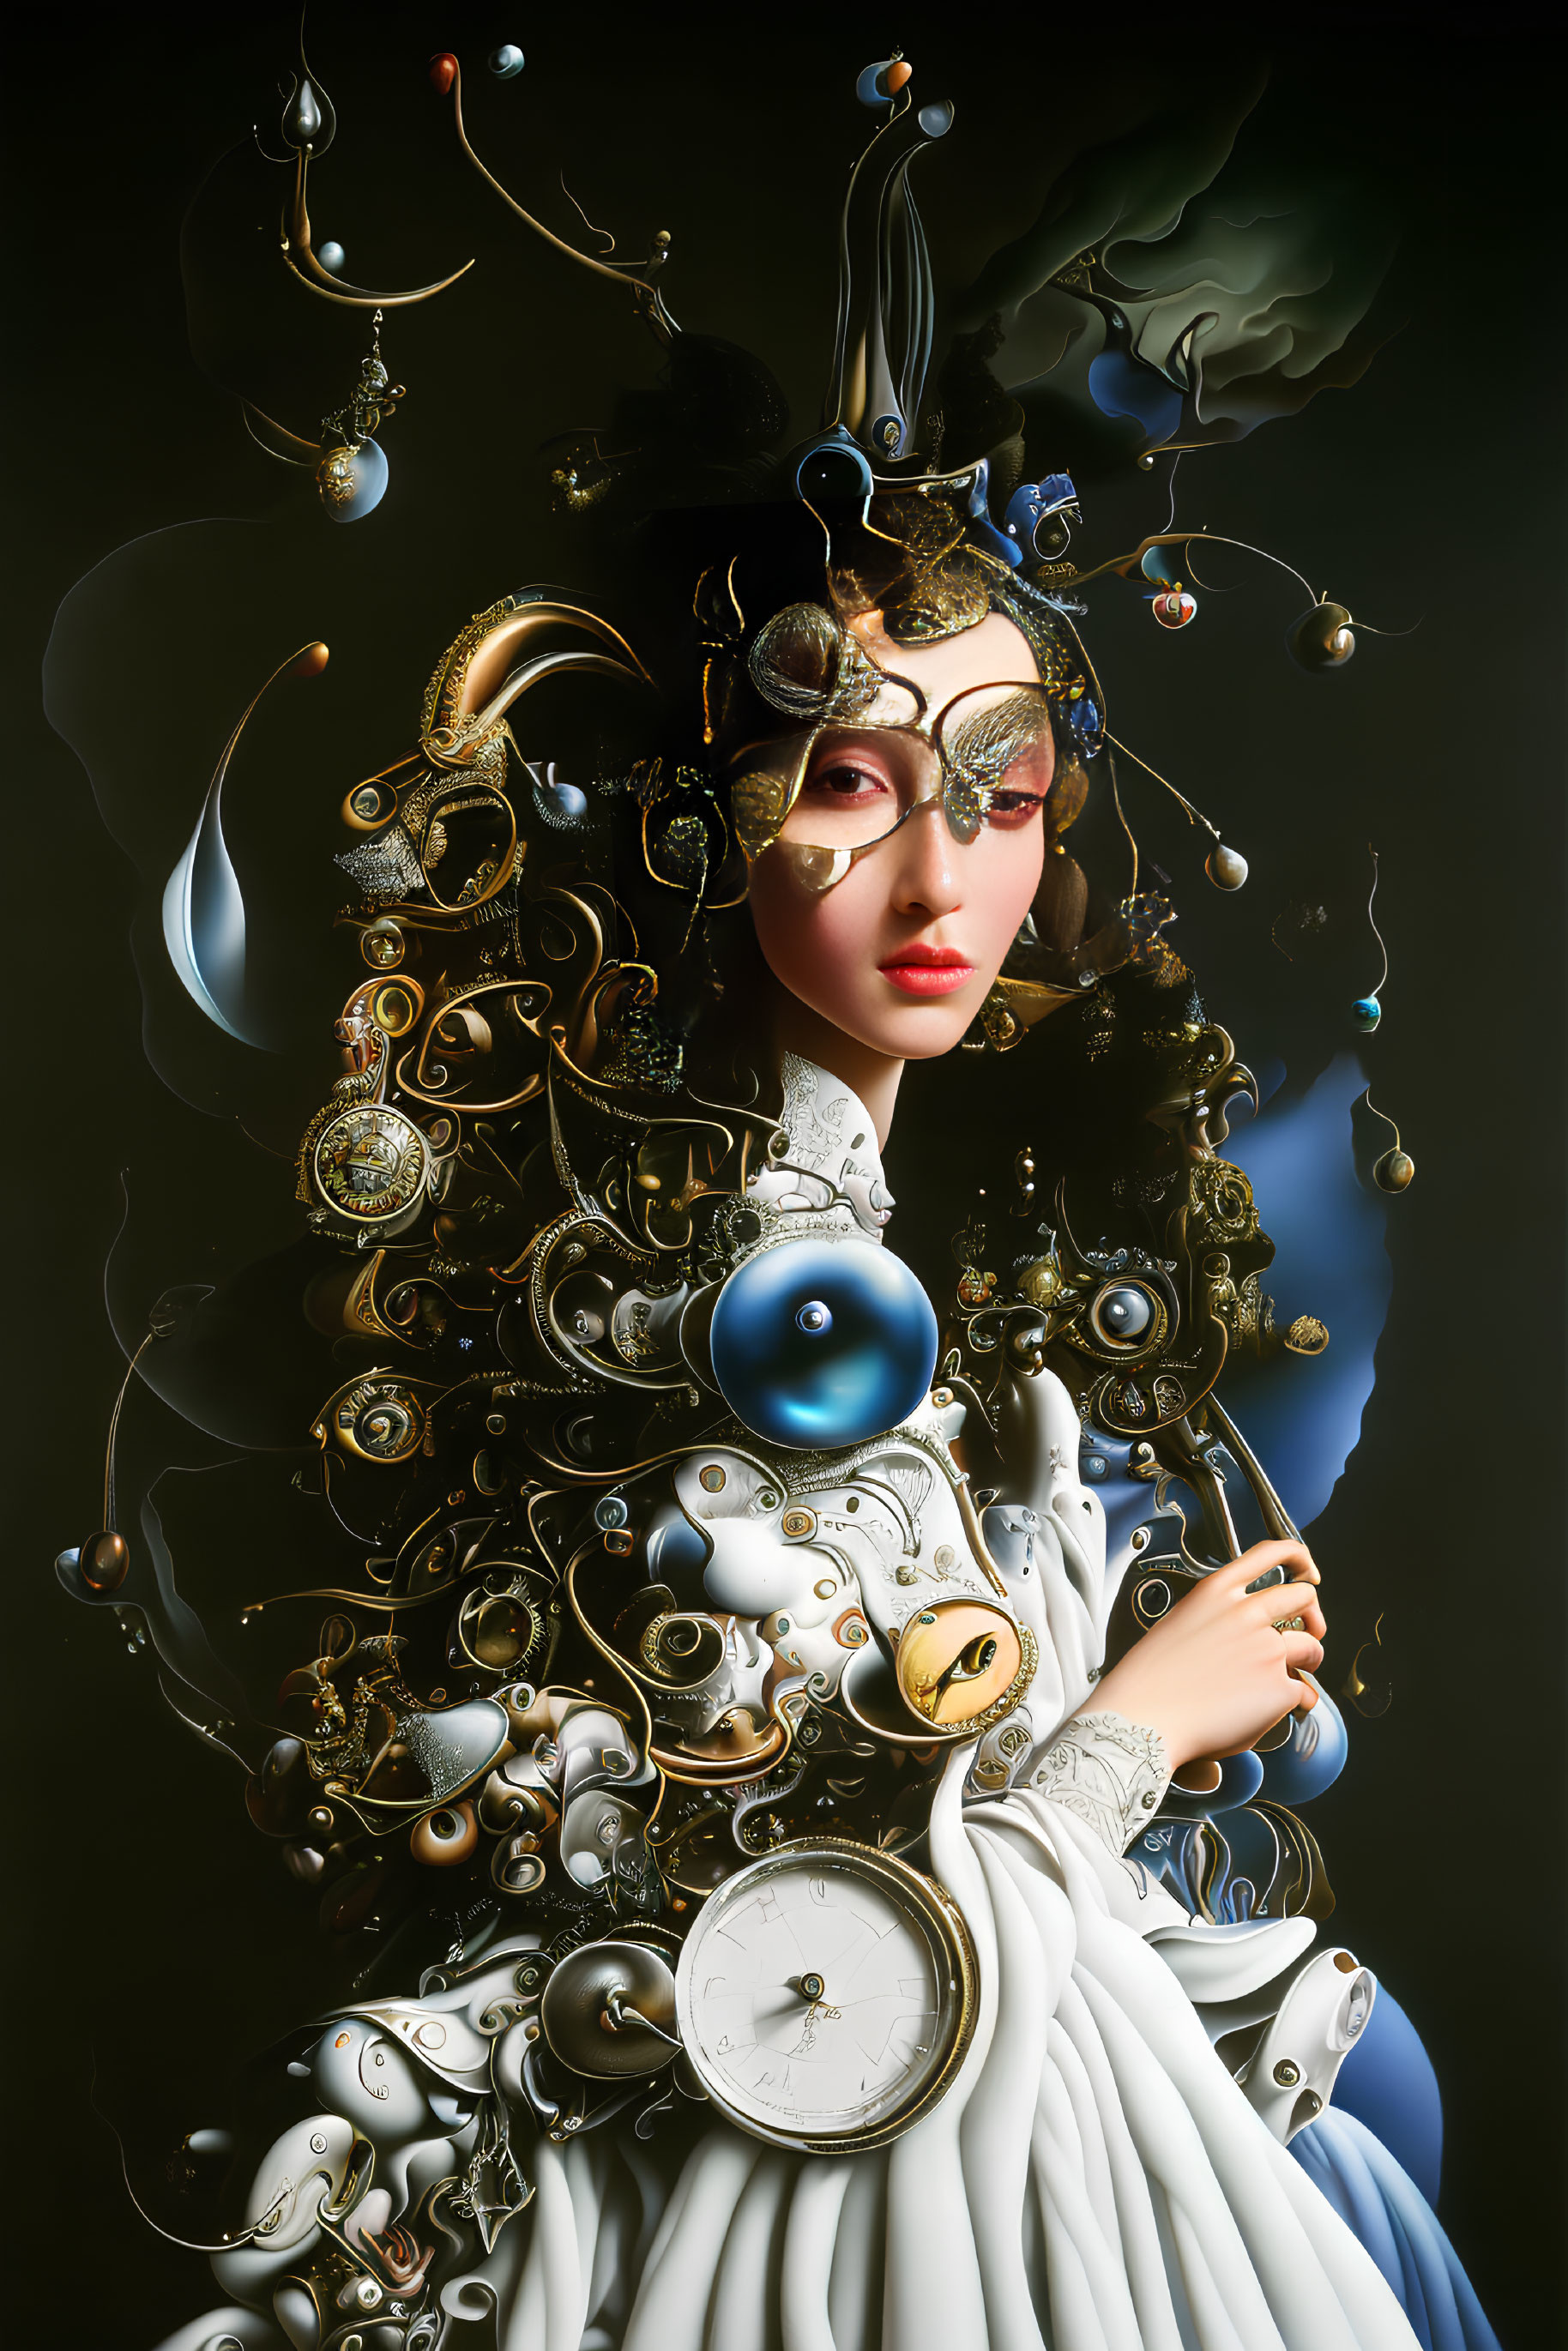 Surreal portrait of female figure with golden ornaments and steampunk theme